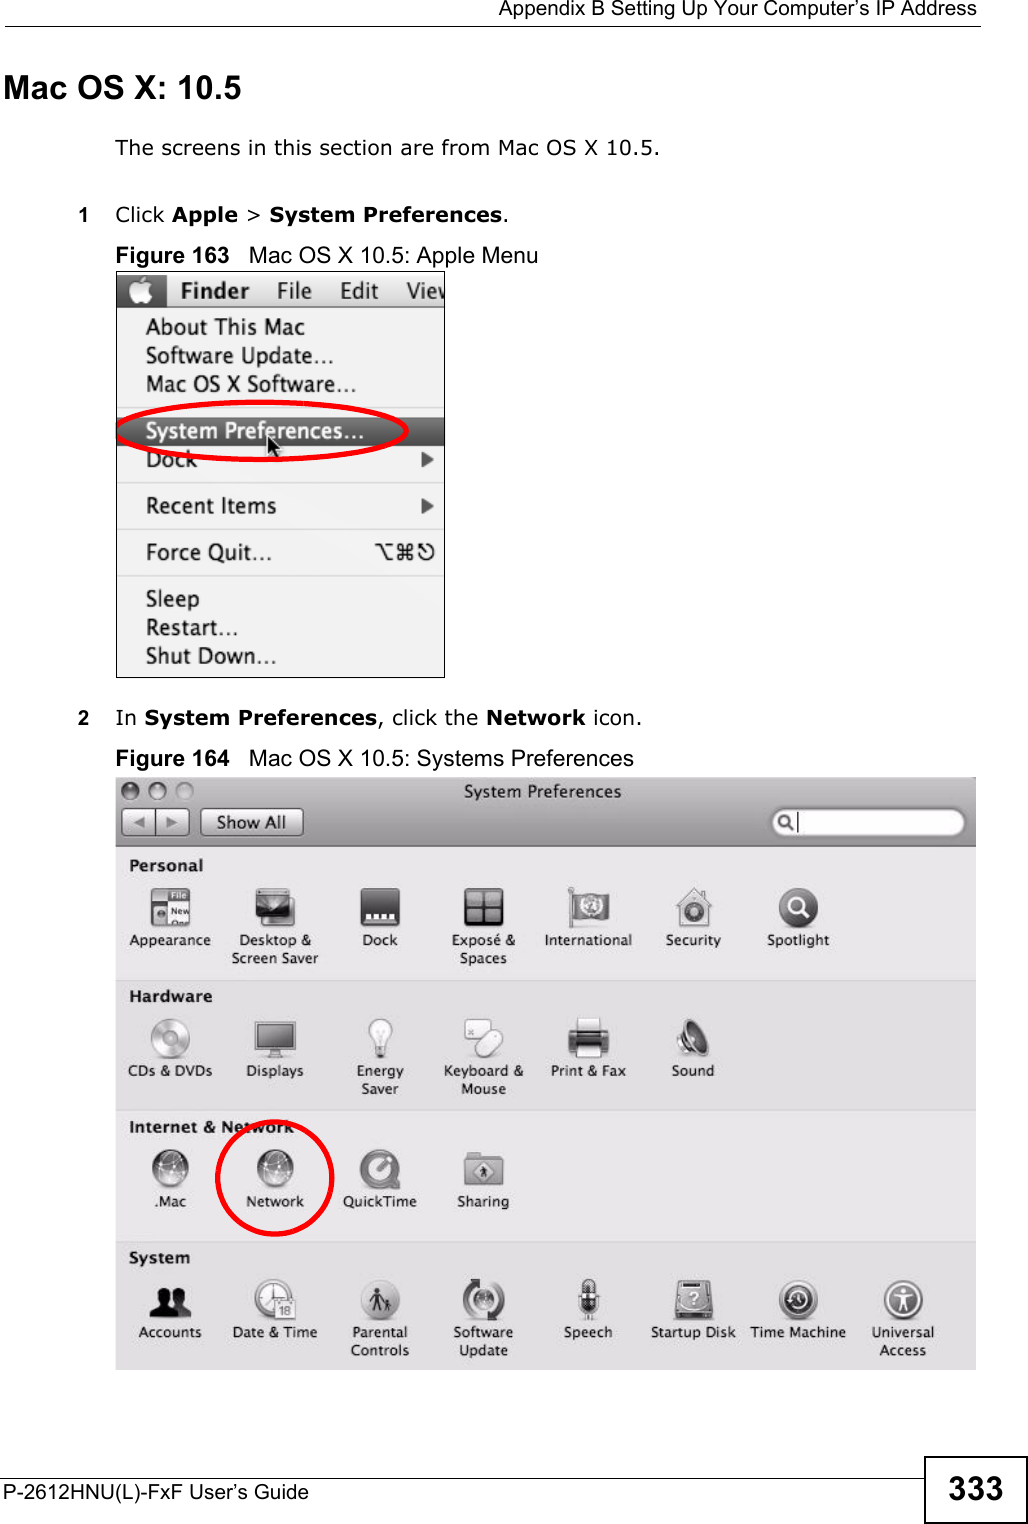  Appendix B Setting Up Your Computer’s IP AddressP-2612HNU(L)-FxF User’s Guide 333Mac OS X: 10.5The screens in this section are from Mac OS X 10.5.1Click Apple &gt; System Preferences.Figure 163   Mac OS X 10.5: Apple Menu2In System Preferences, click the Network icon.Figure 164   Mac OS X 10.5: Systems Preferences